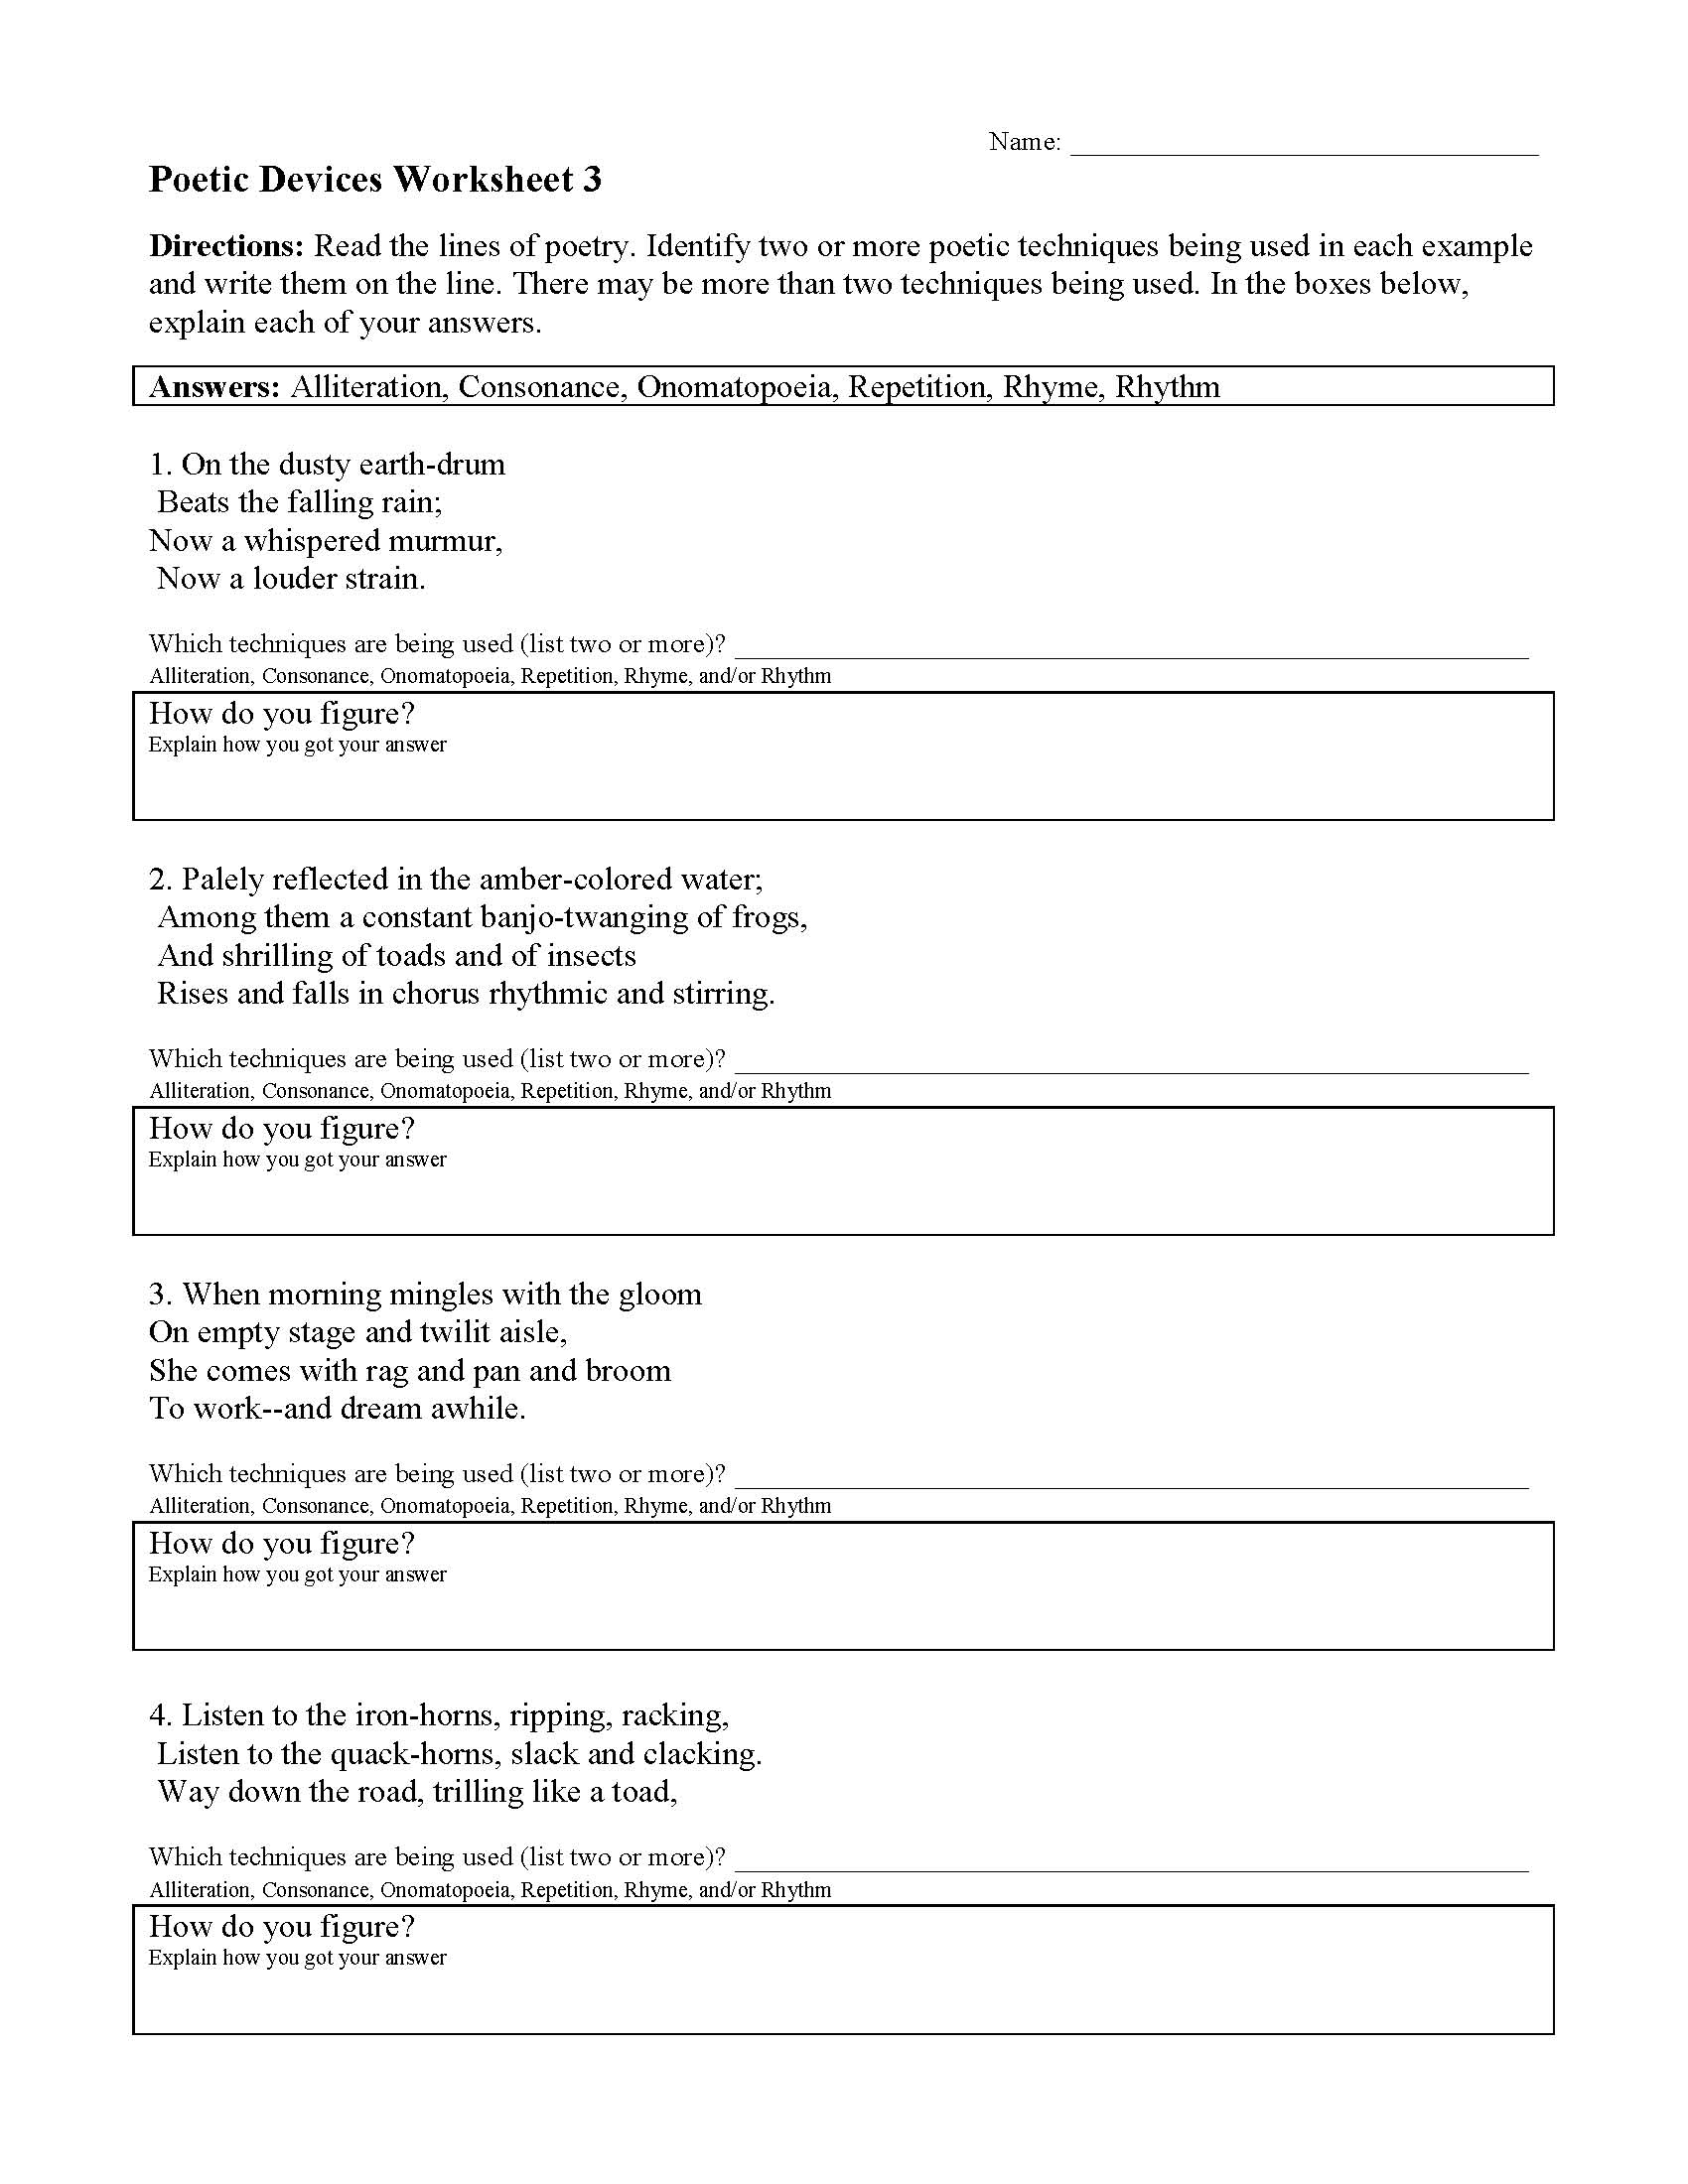 Poetic Devices Worksheet 22  Reading Activity With Regard To Literary Devices Worksheet Pdf